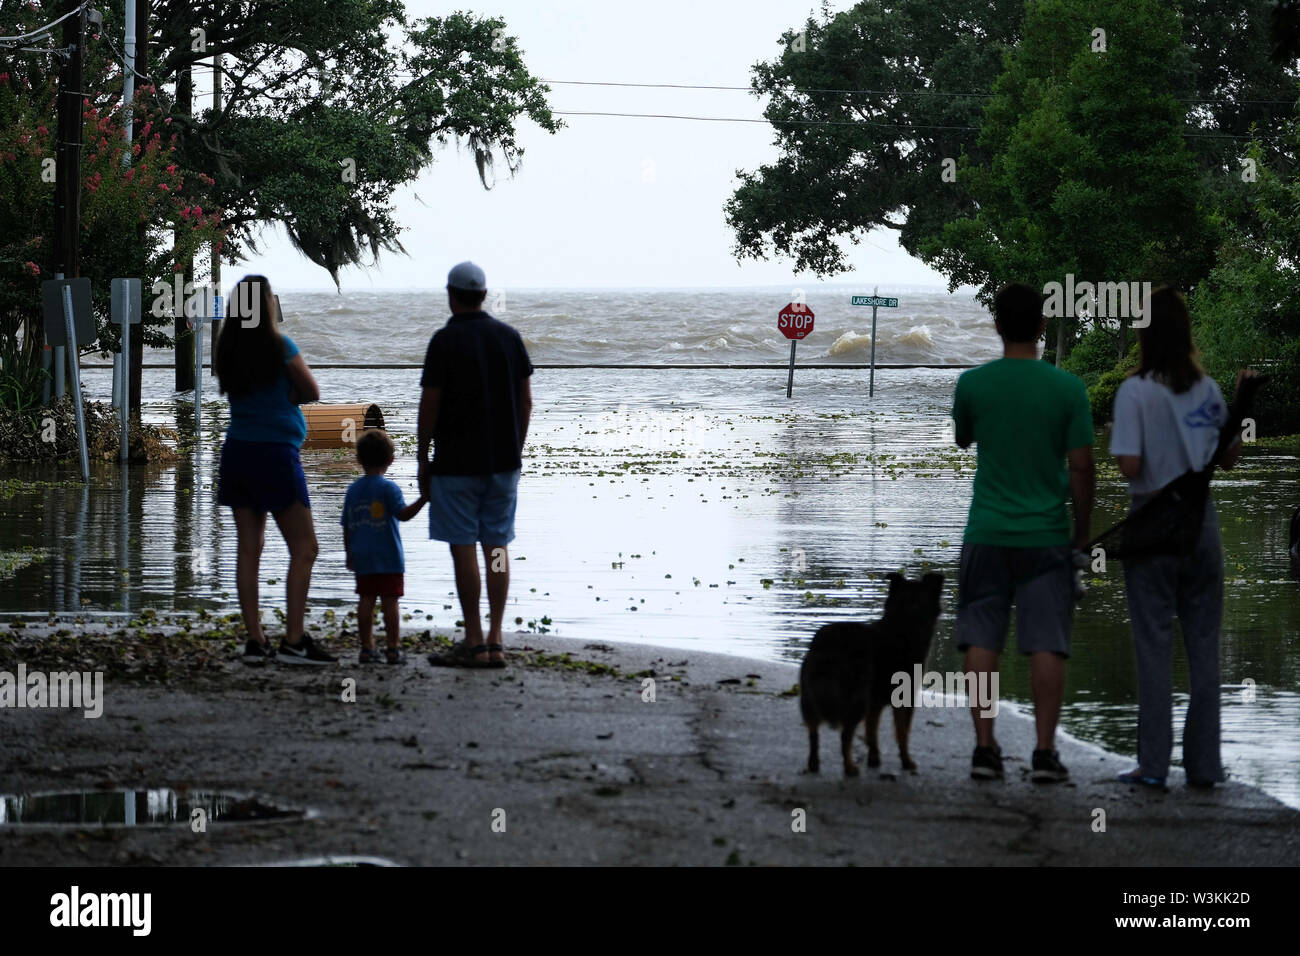 July 13, 2019 - Mandeville, LOUISIANA, U.S - People look out at a flooded road near Lake Pontchartrain in Mandeville, Louisiana USA as Hurricane Barry makes landfall on July 13, 2019. (Credit Image: © Dan Anderson/ZUMA Wire) Stock Photo